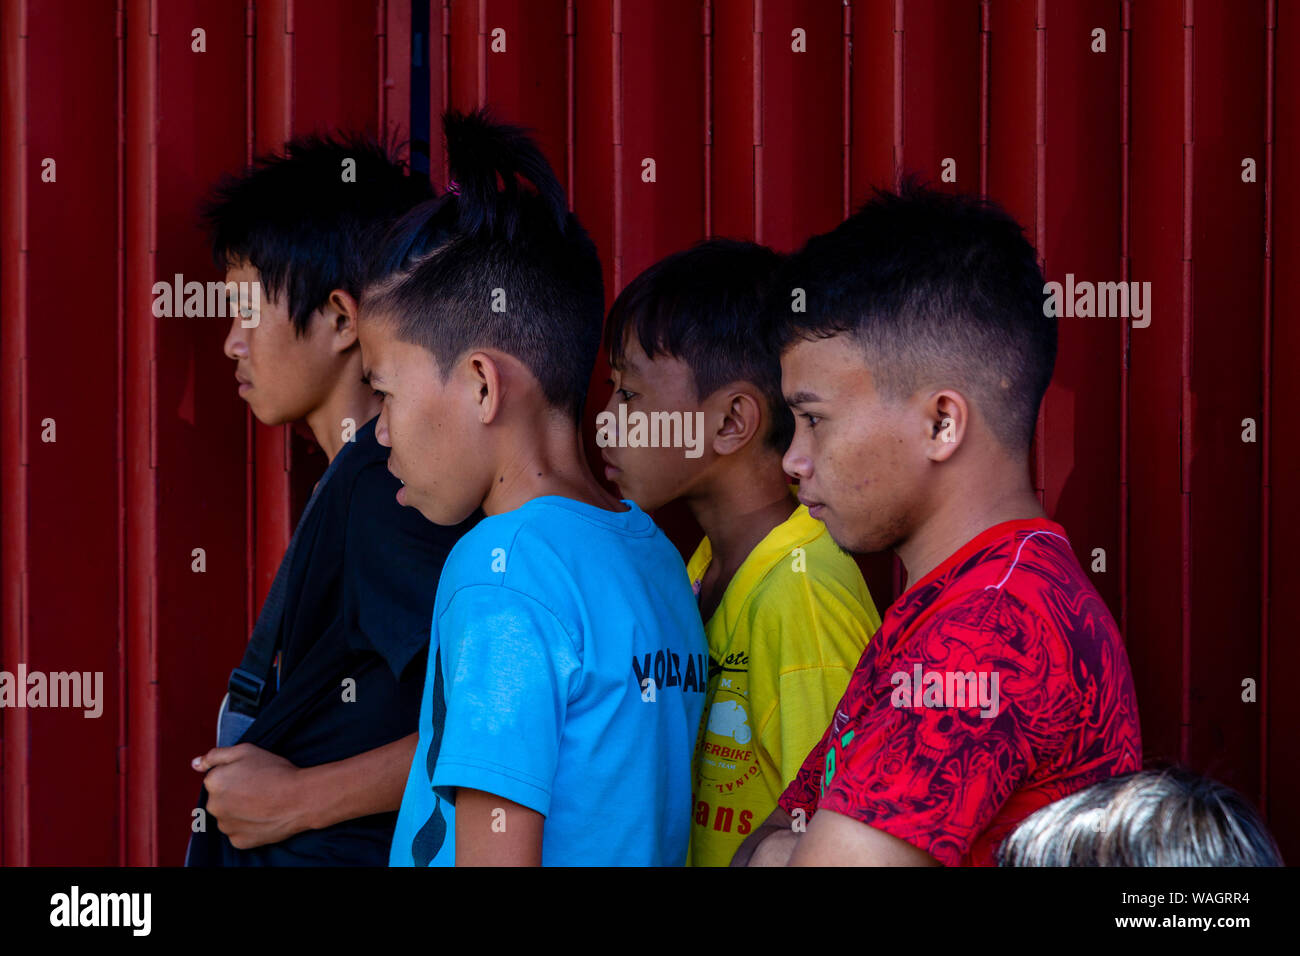 A Group of Filipino Boys Watch A Street Entertainer In Kalibo, Panay Island, Aklan Province, Western Visayas, The Philippines. Stock Photo